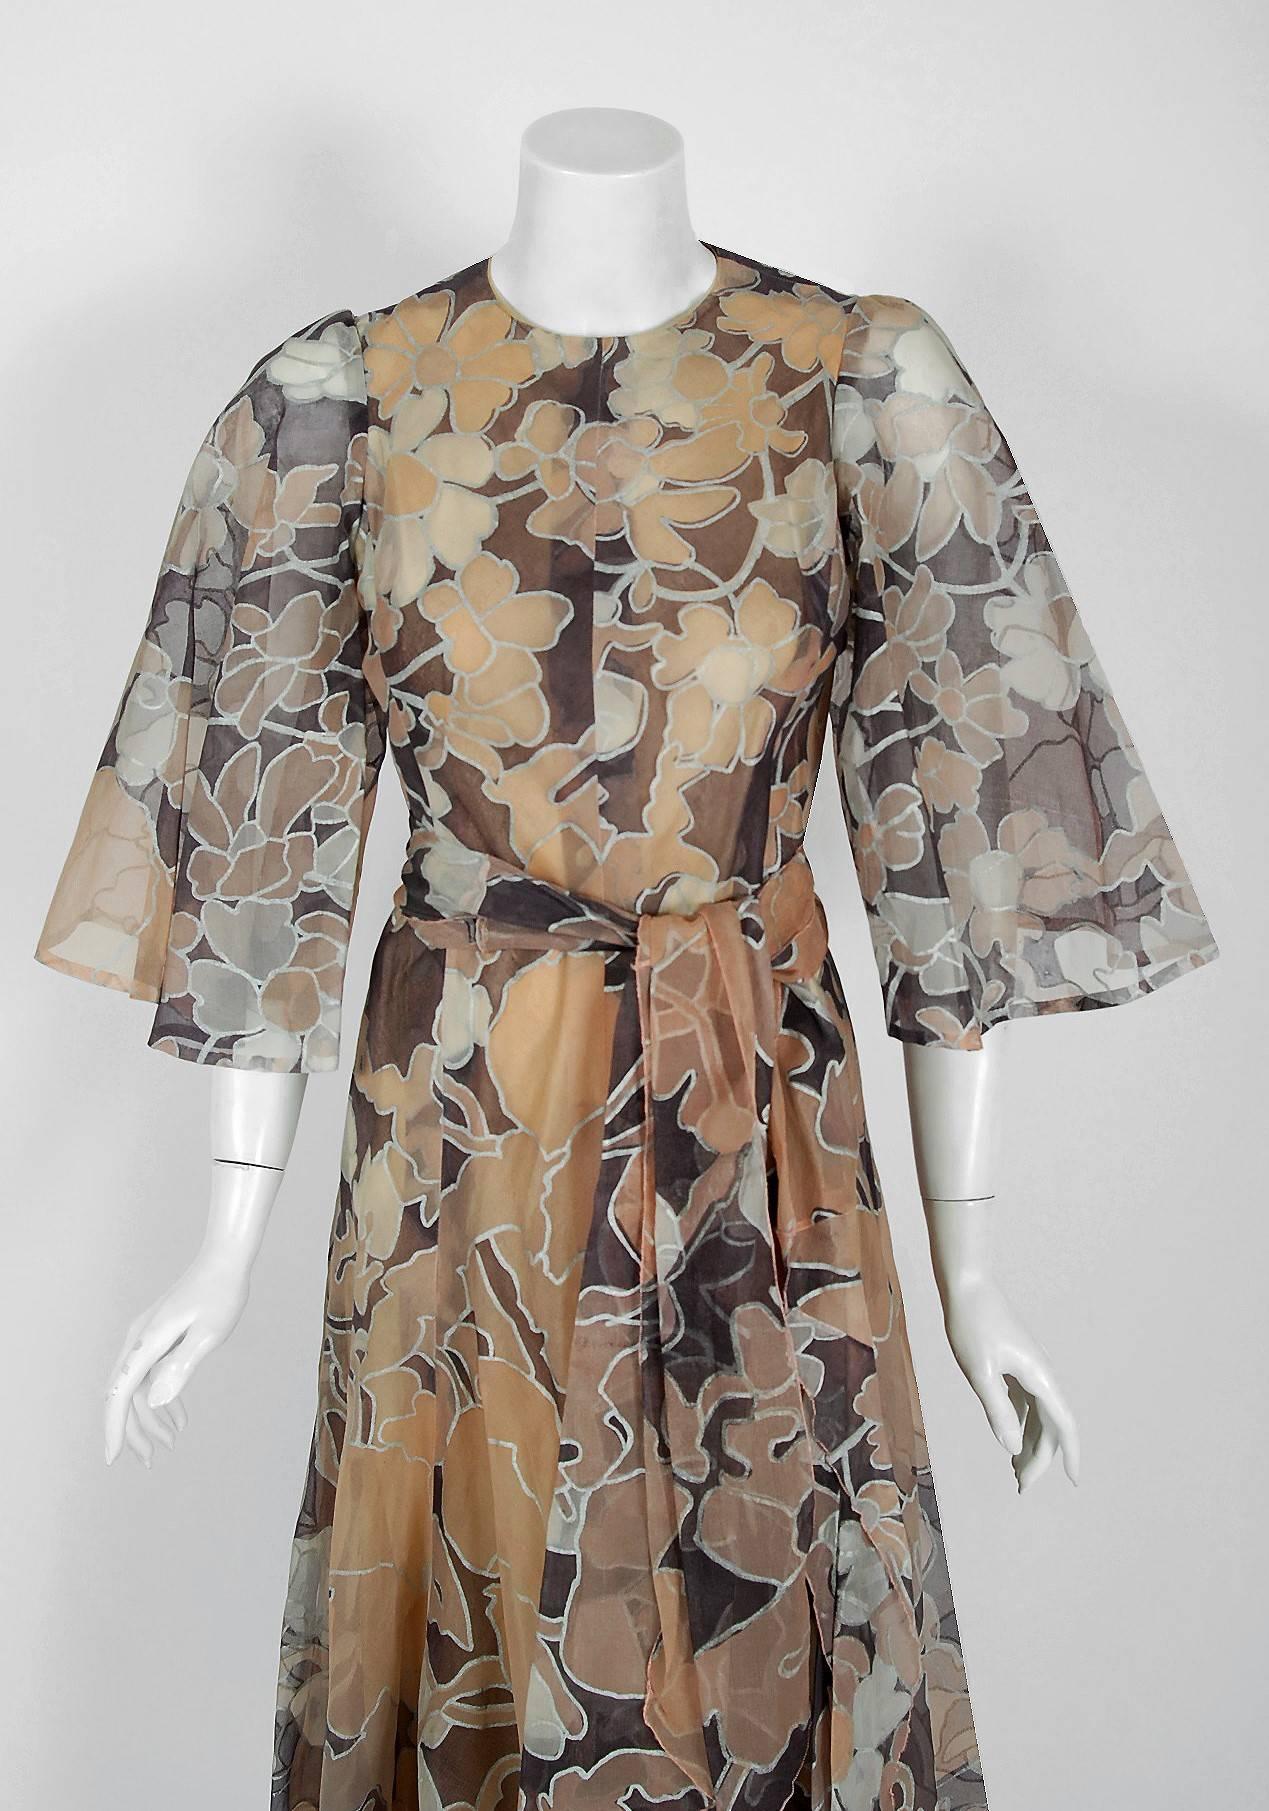 Gorgeous Jean-Louis Scherrer numbered couture dress dating back to his 1975 collection. Jean-Louis studied fashion at the Chambre Syndicale de la Couture in Paris and once finished, began working at the house of Dior alongside Yves Saint Laurent. It